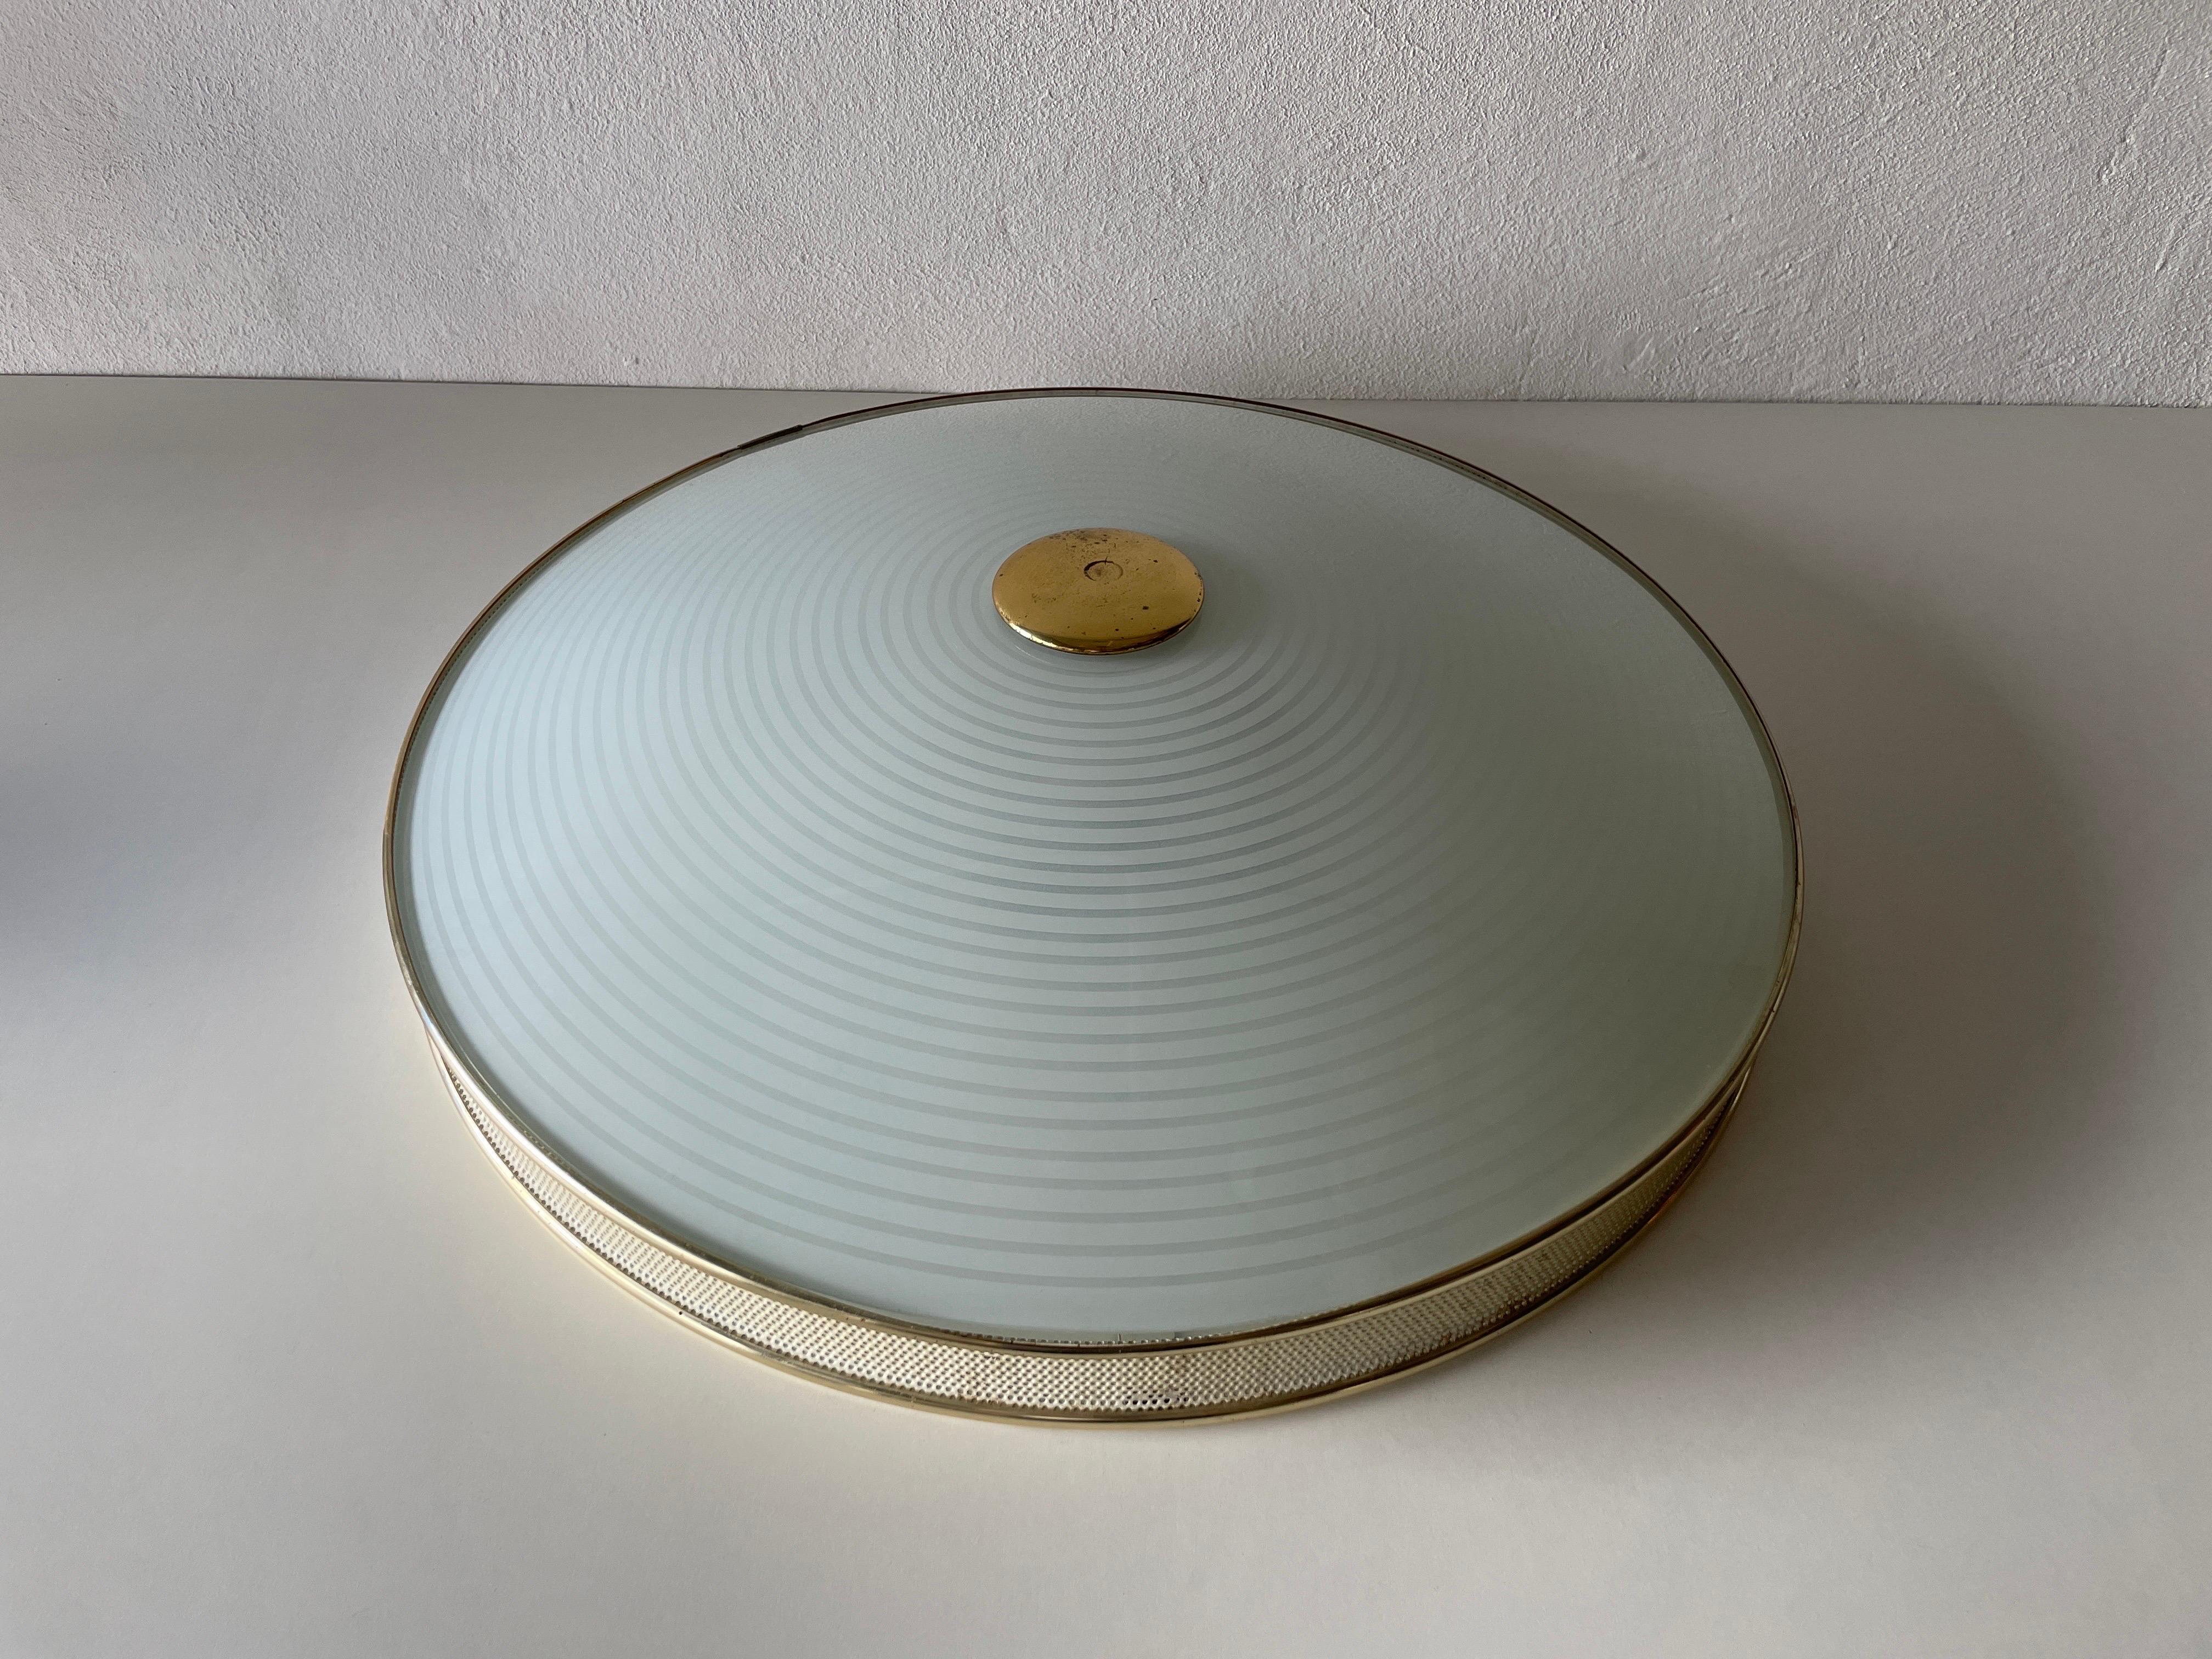 Ufo Design Glass and Metal XL Flush Mount Ceiling Lamp by Hillebrand, 1950s, Germany

Lampshade is in very good vintage condition.

This lamp works with 5x E27 light bulbs. 
Wired and suitable to use with 220V and 110V for all